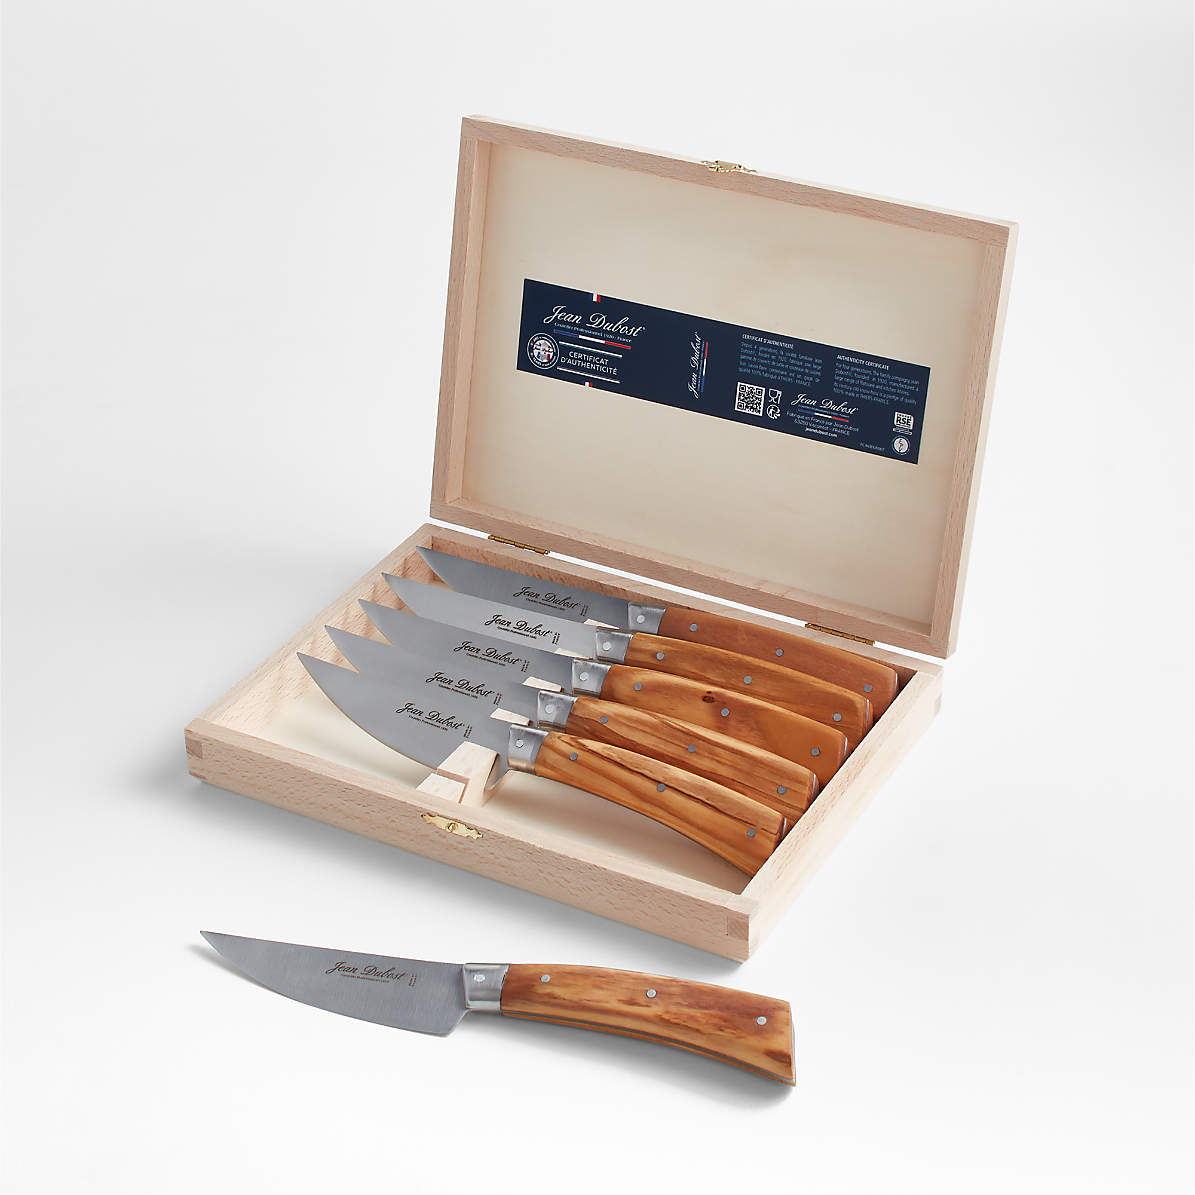 Cangshan Knife Set Review: Olive wood handles offer durability and style -  Reviewed